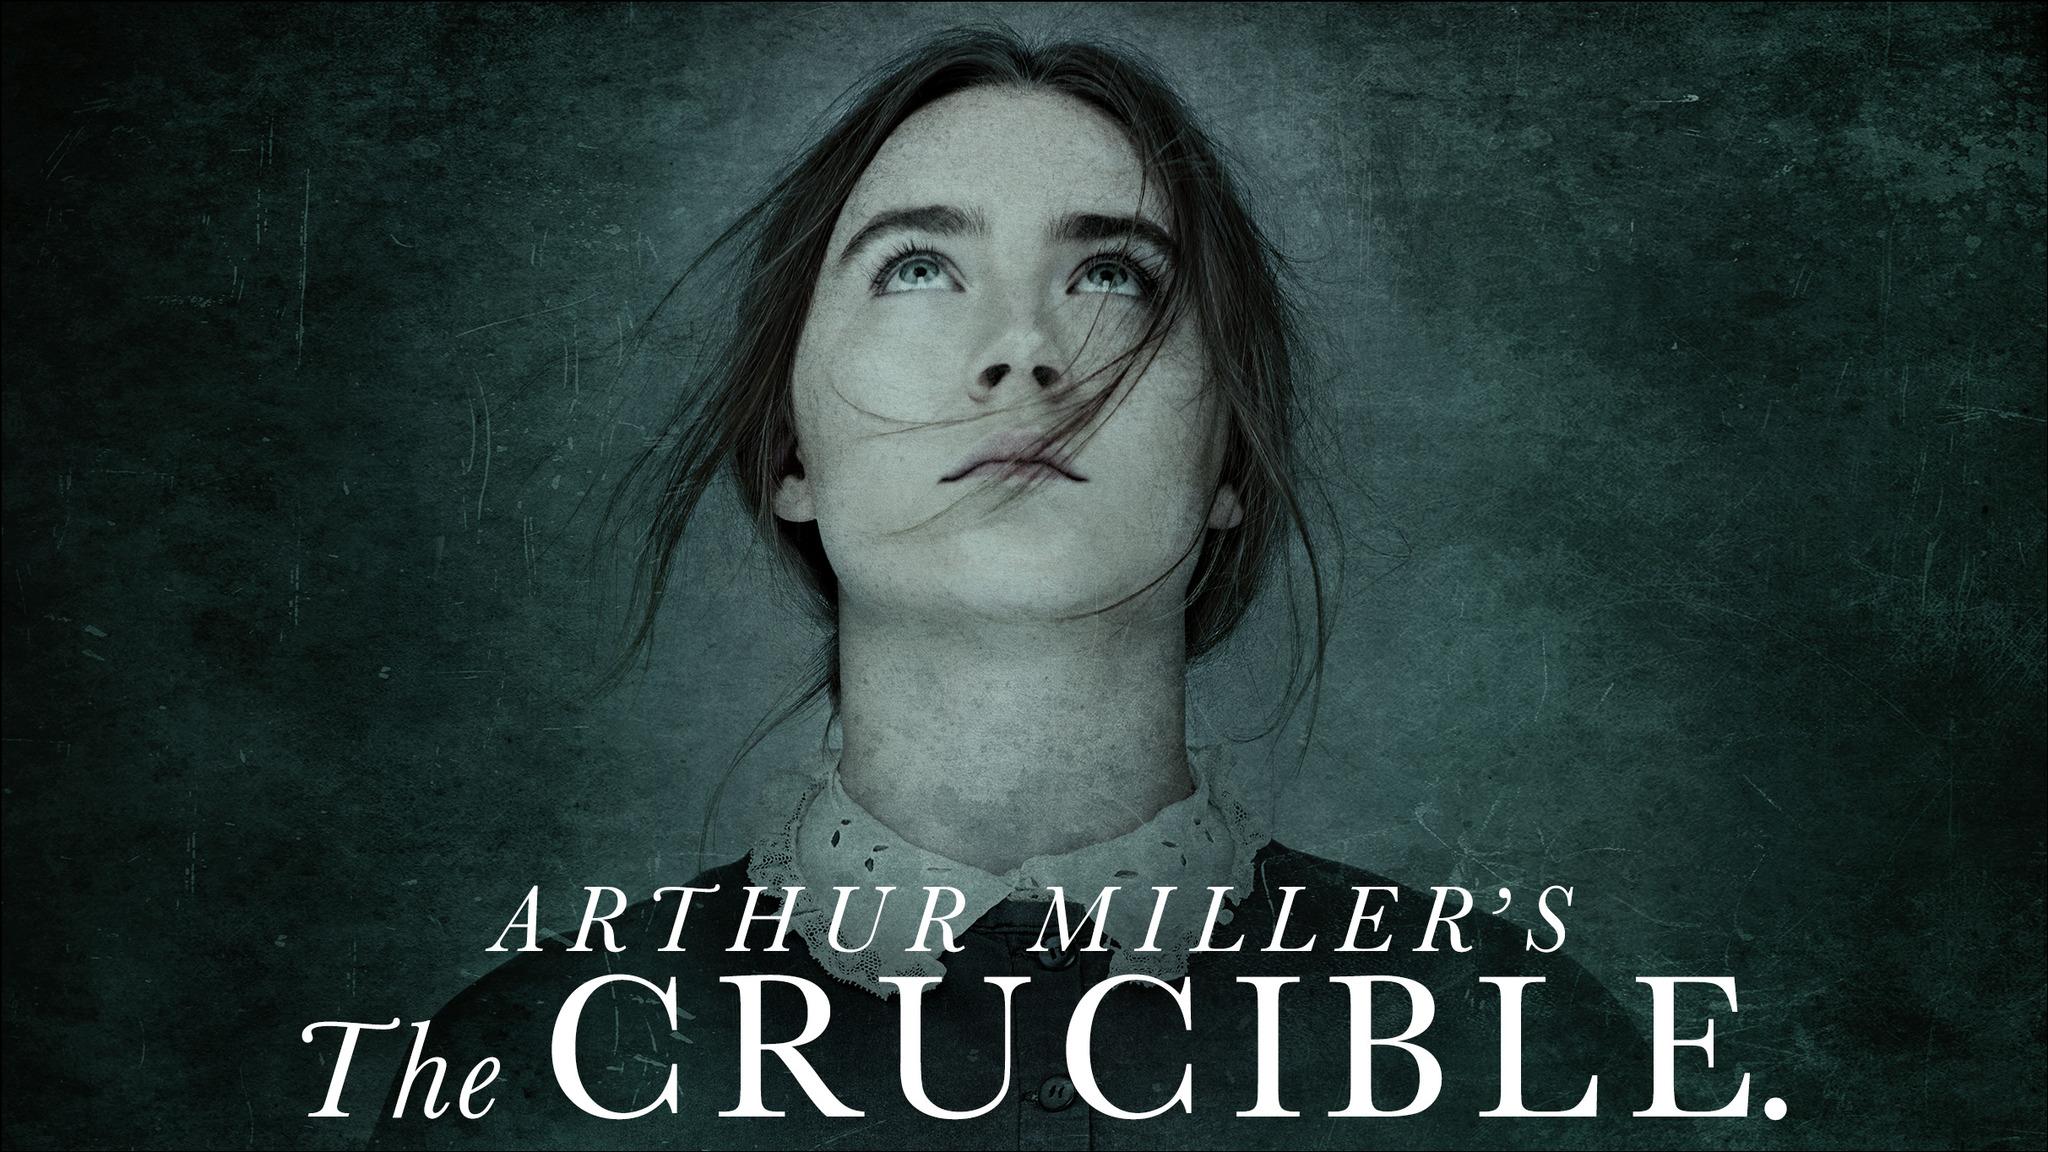 arthur miller and the crucible